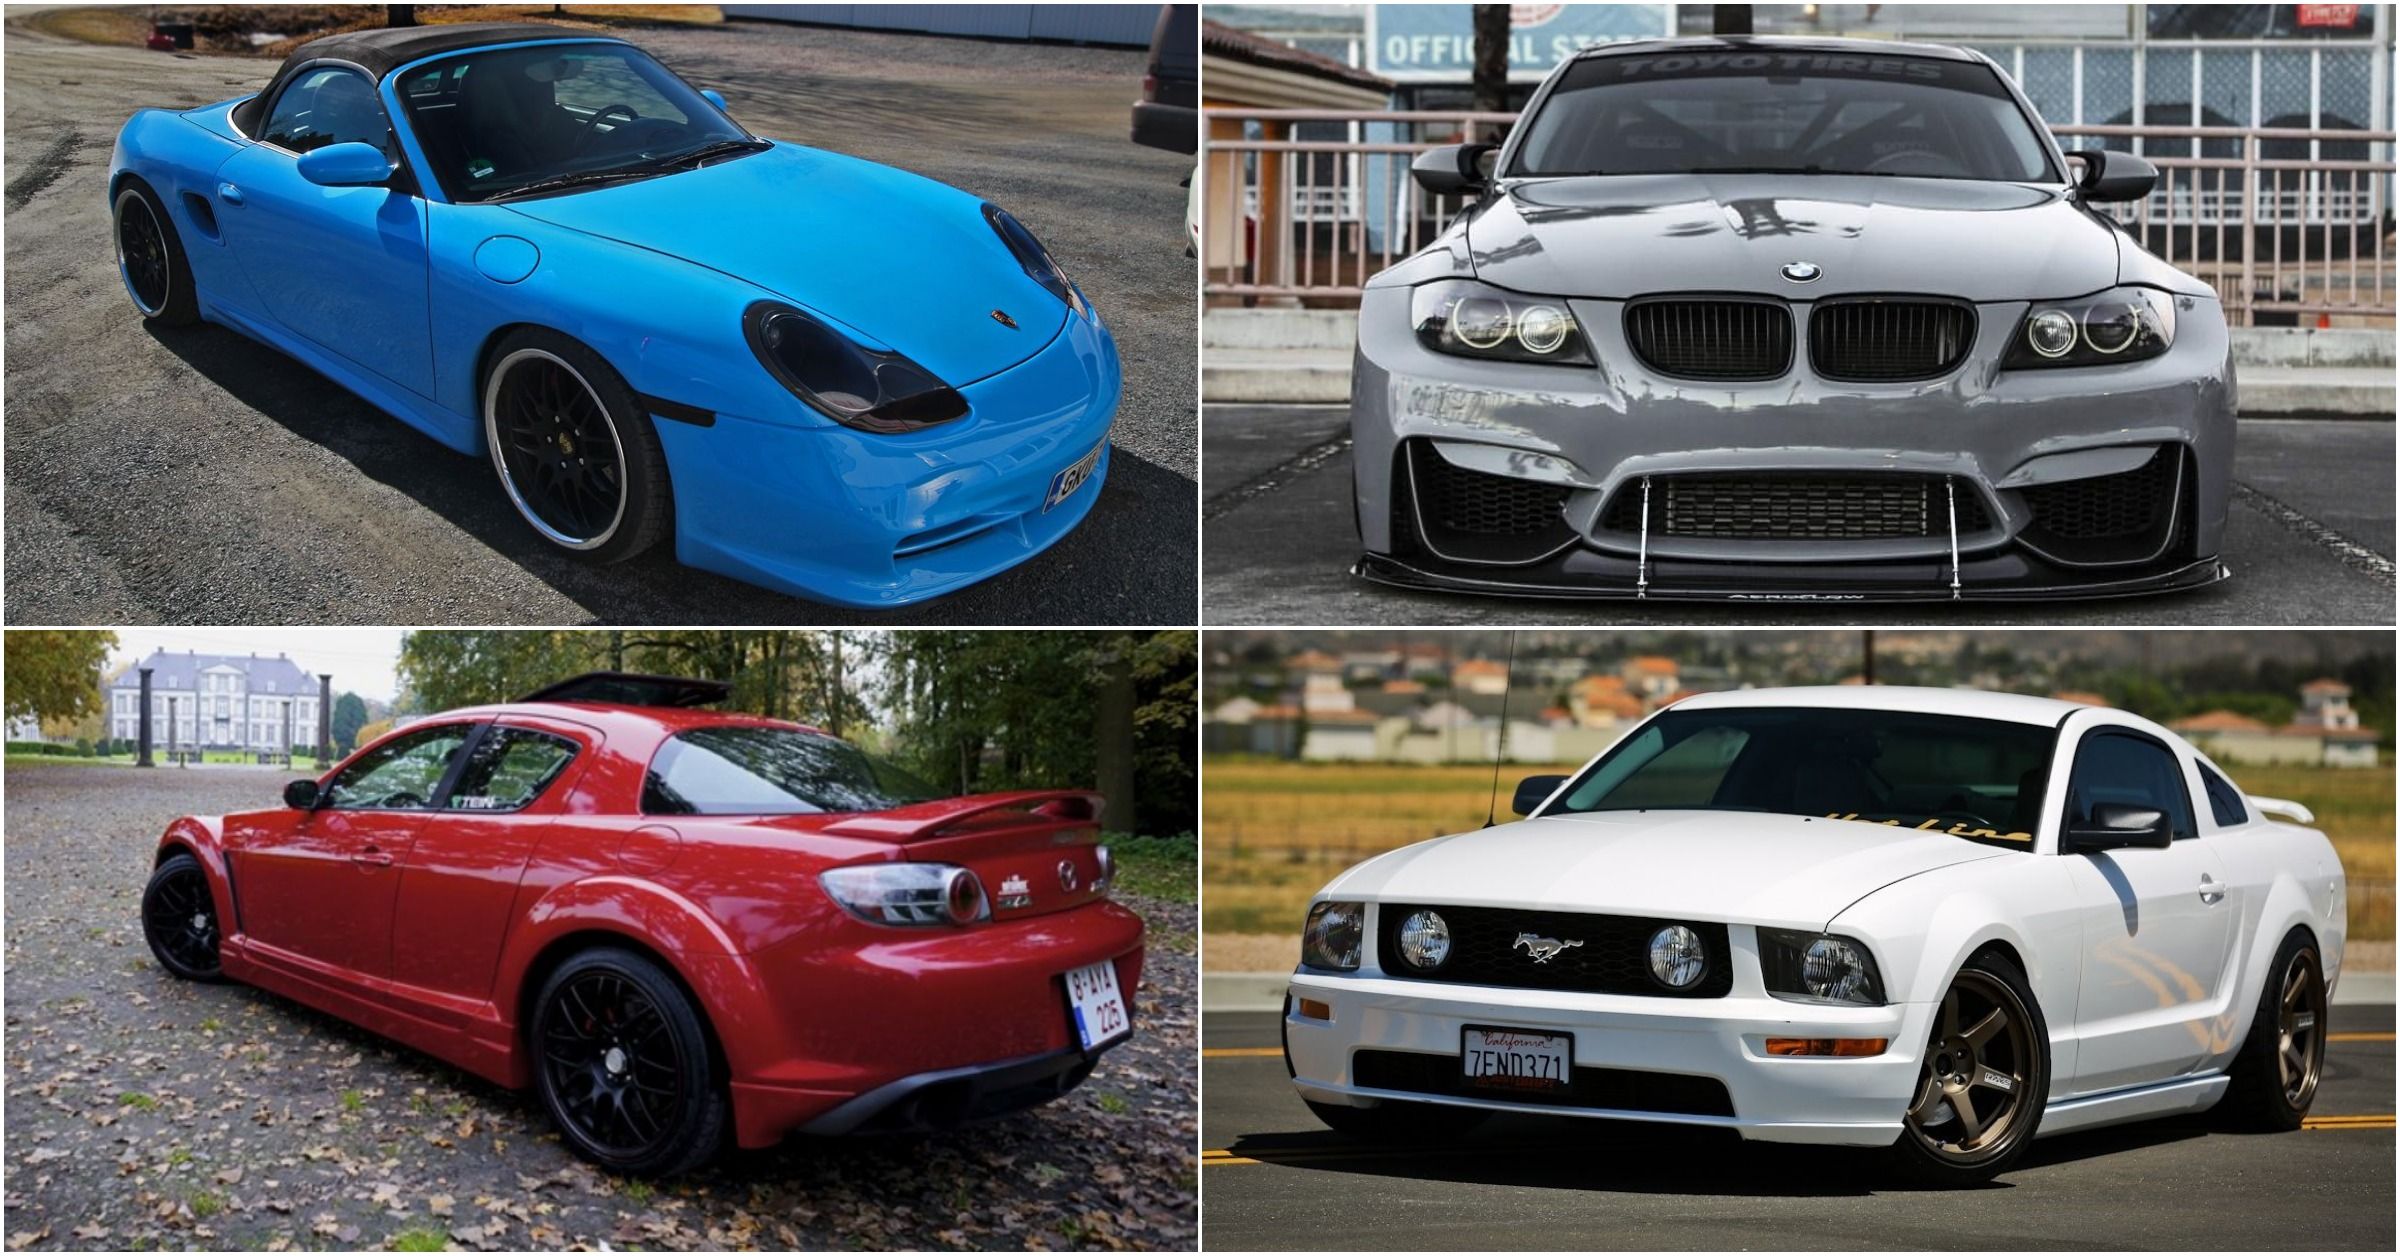 15 Exciting Used Cars With Manual Transmissions For Under $15,000